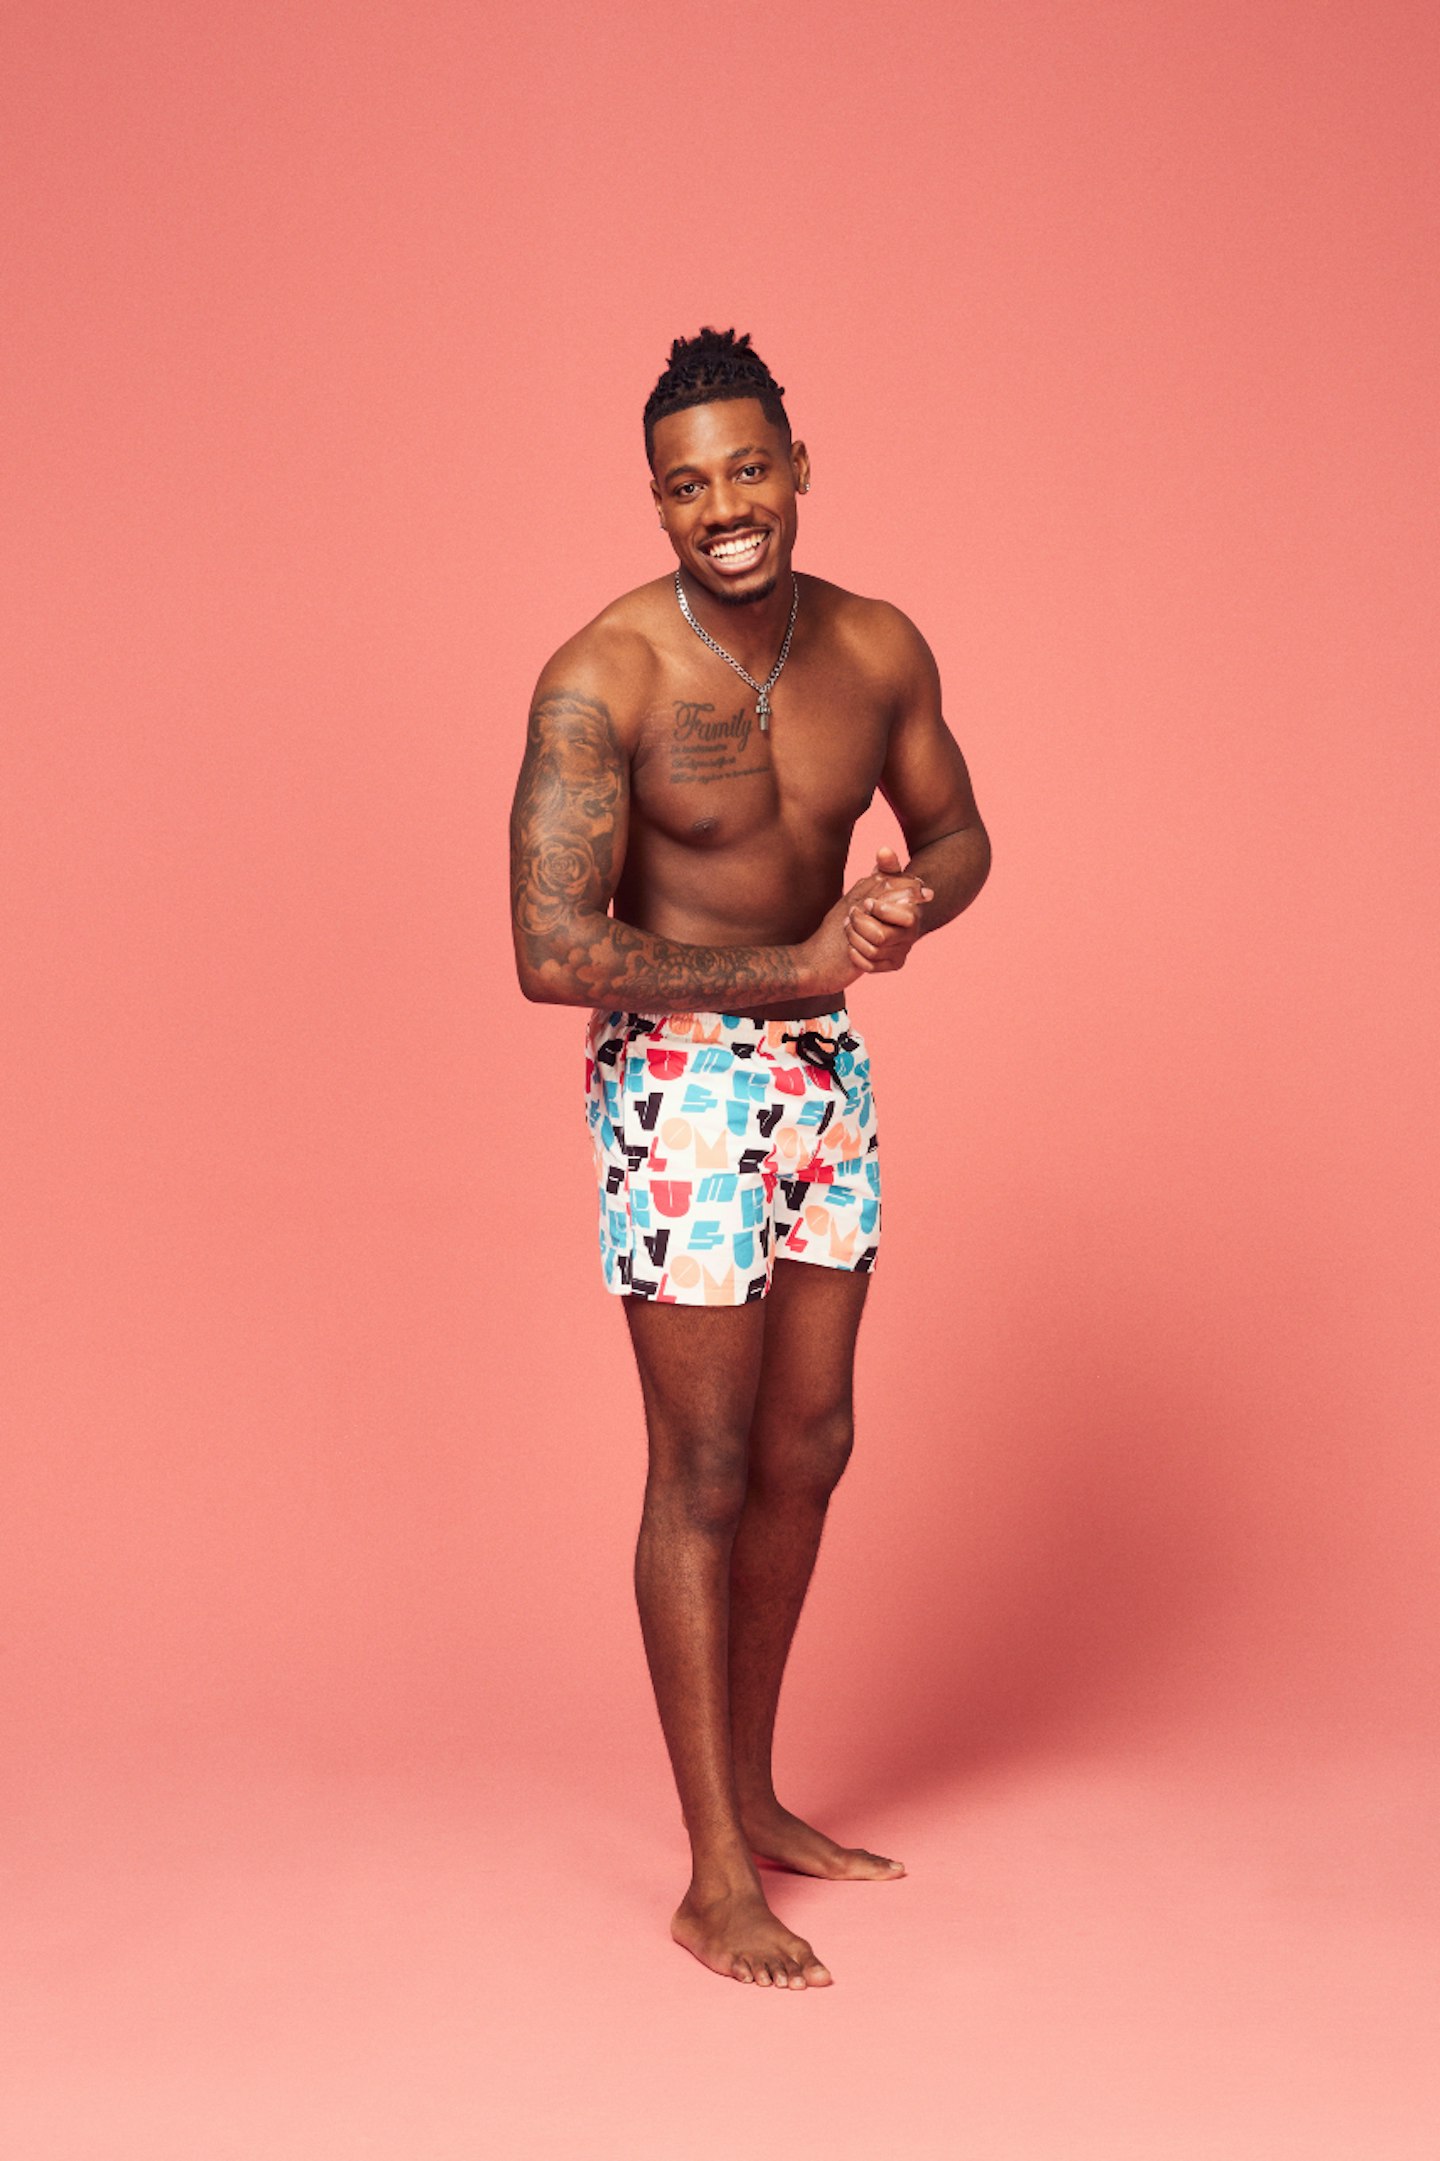 Love Island's Shaq Muhammad posing against a pink background